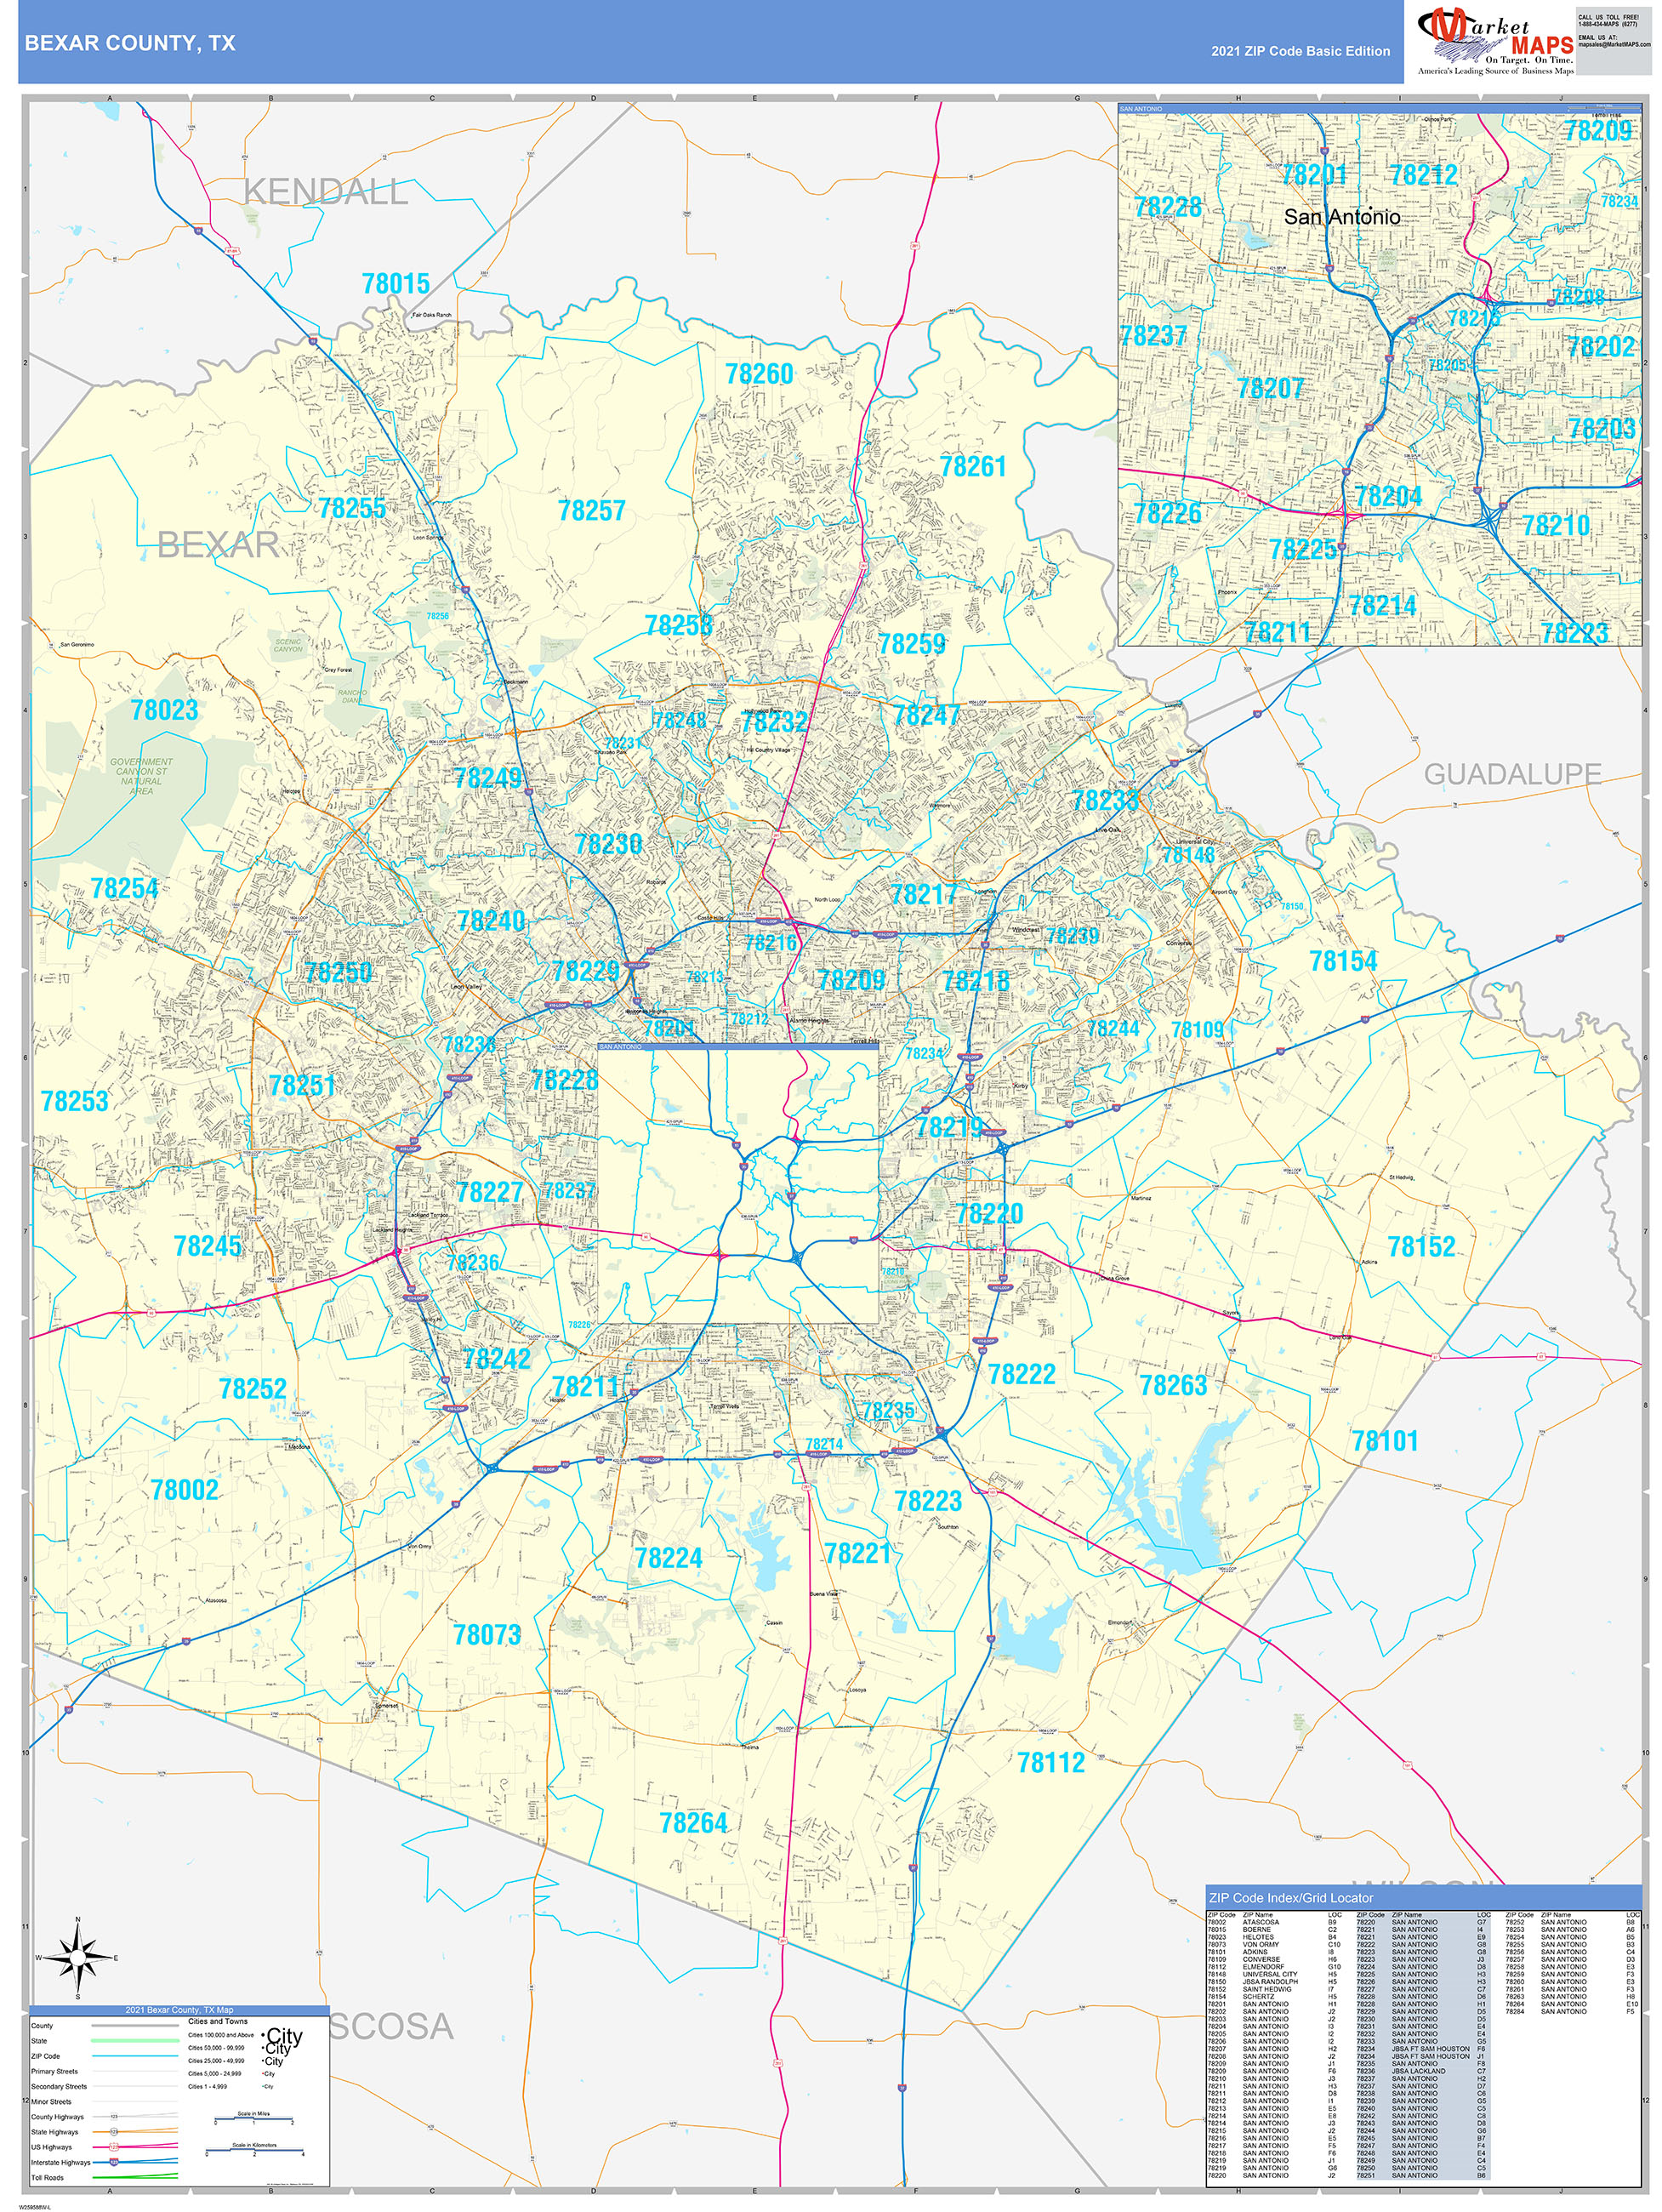 Bexar County, TX Zip Code Wall Map Basic Style by MarketMAPS MapSales